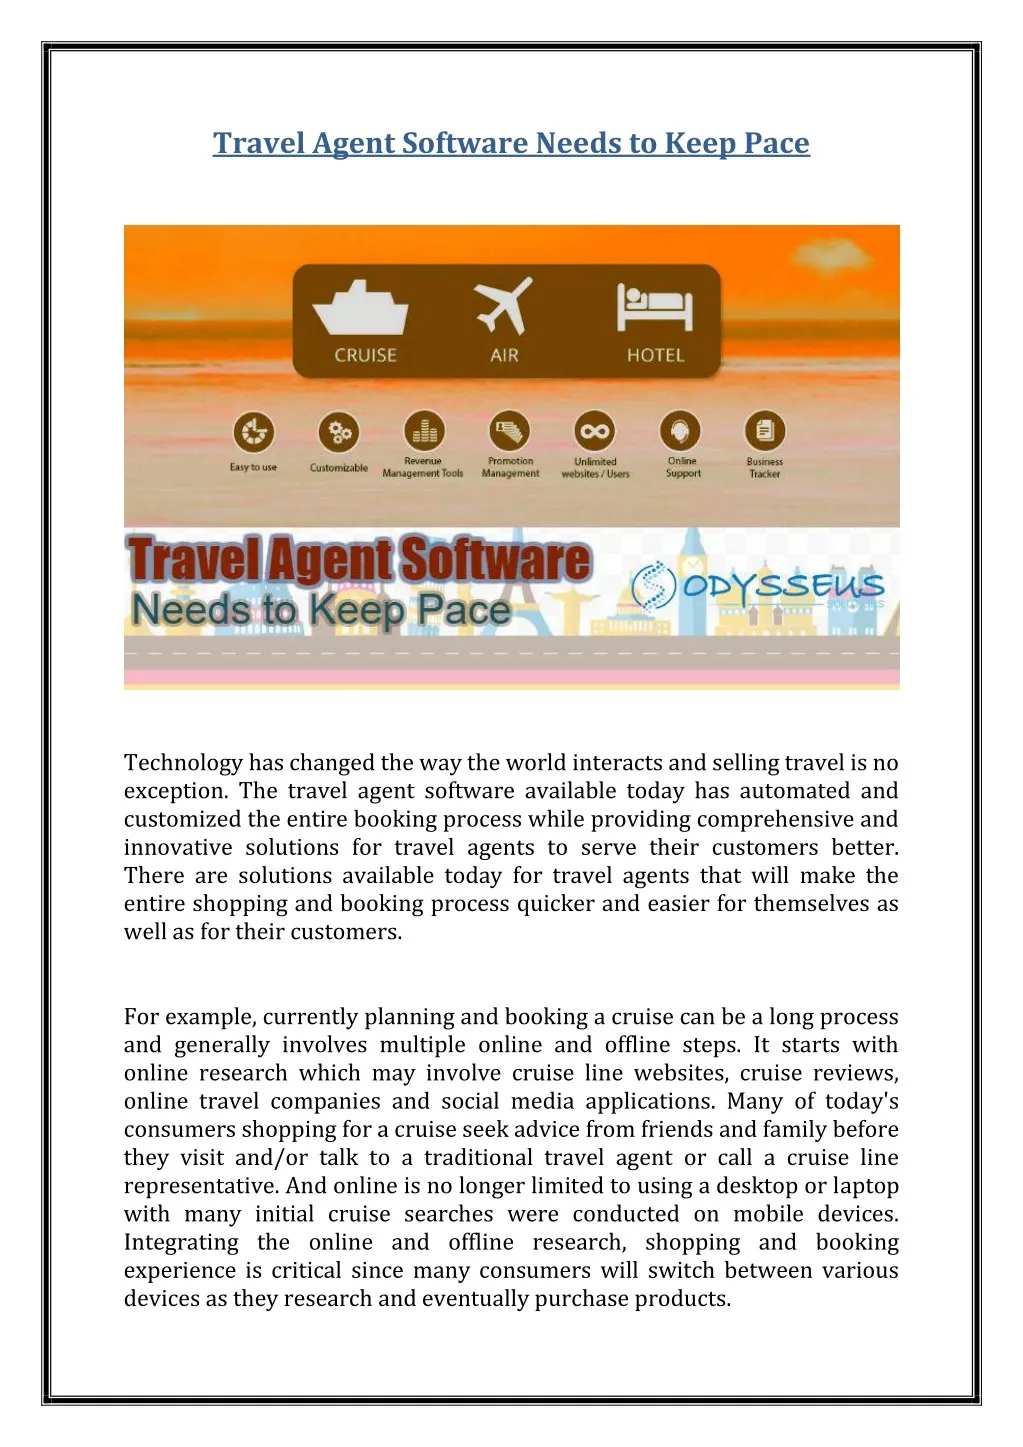 travel agent software needs to keep pace